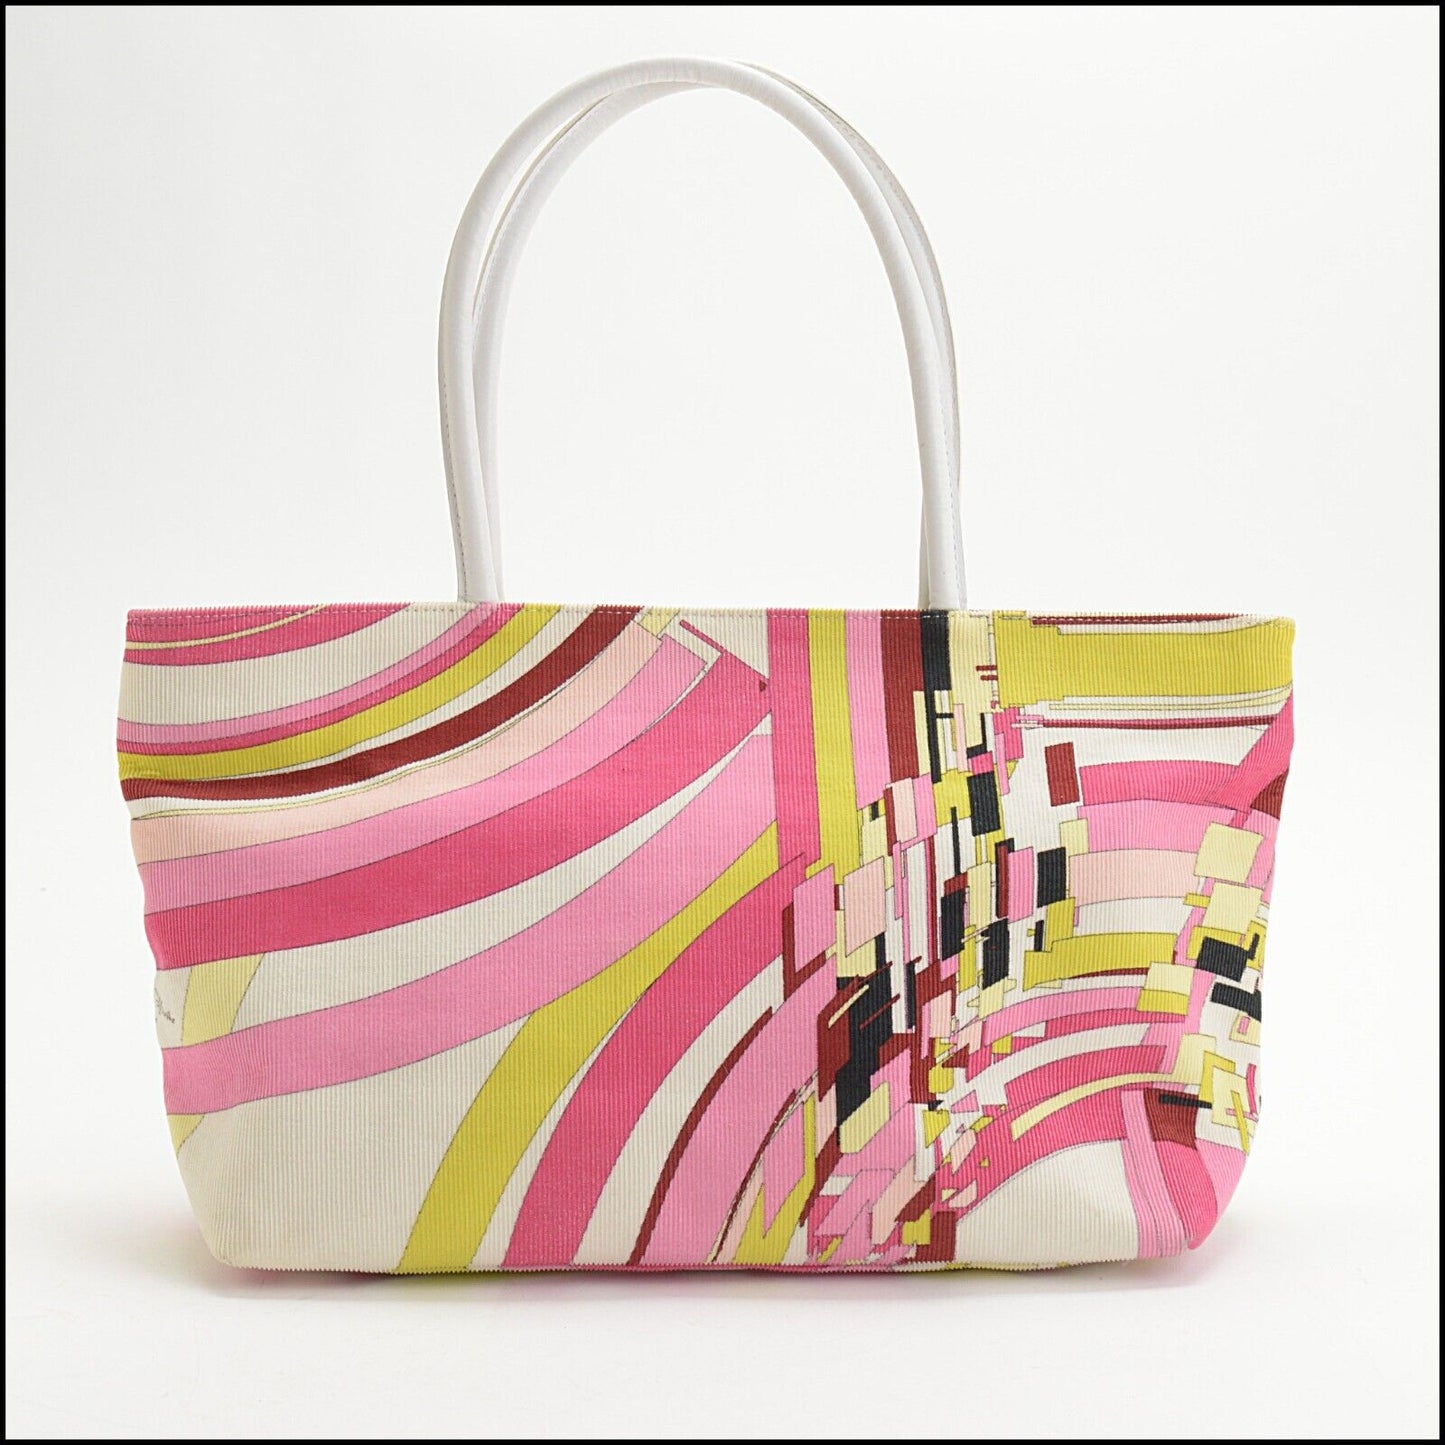 RDC13672 Authentic EMILIO PUCCI White Trim Pink and Green Corduroy Tote Bag